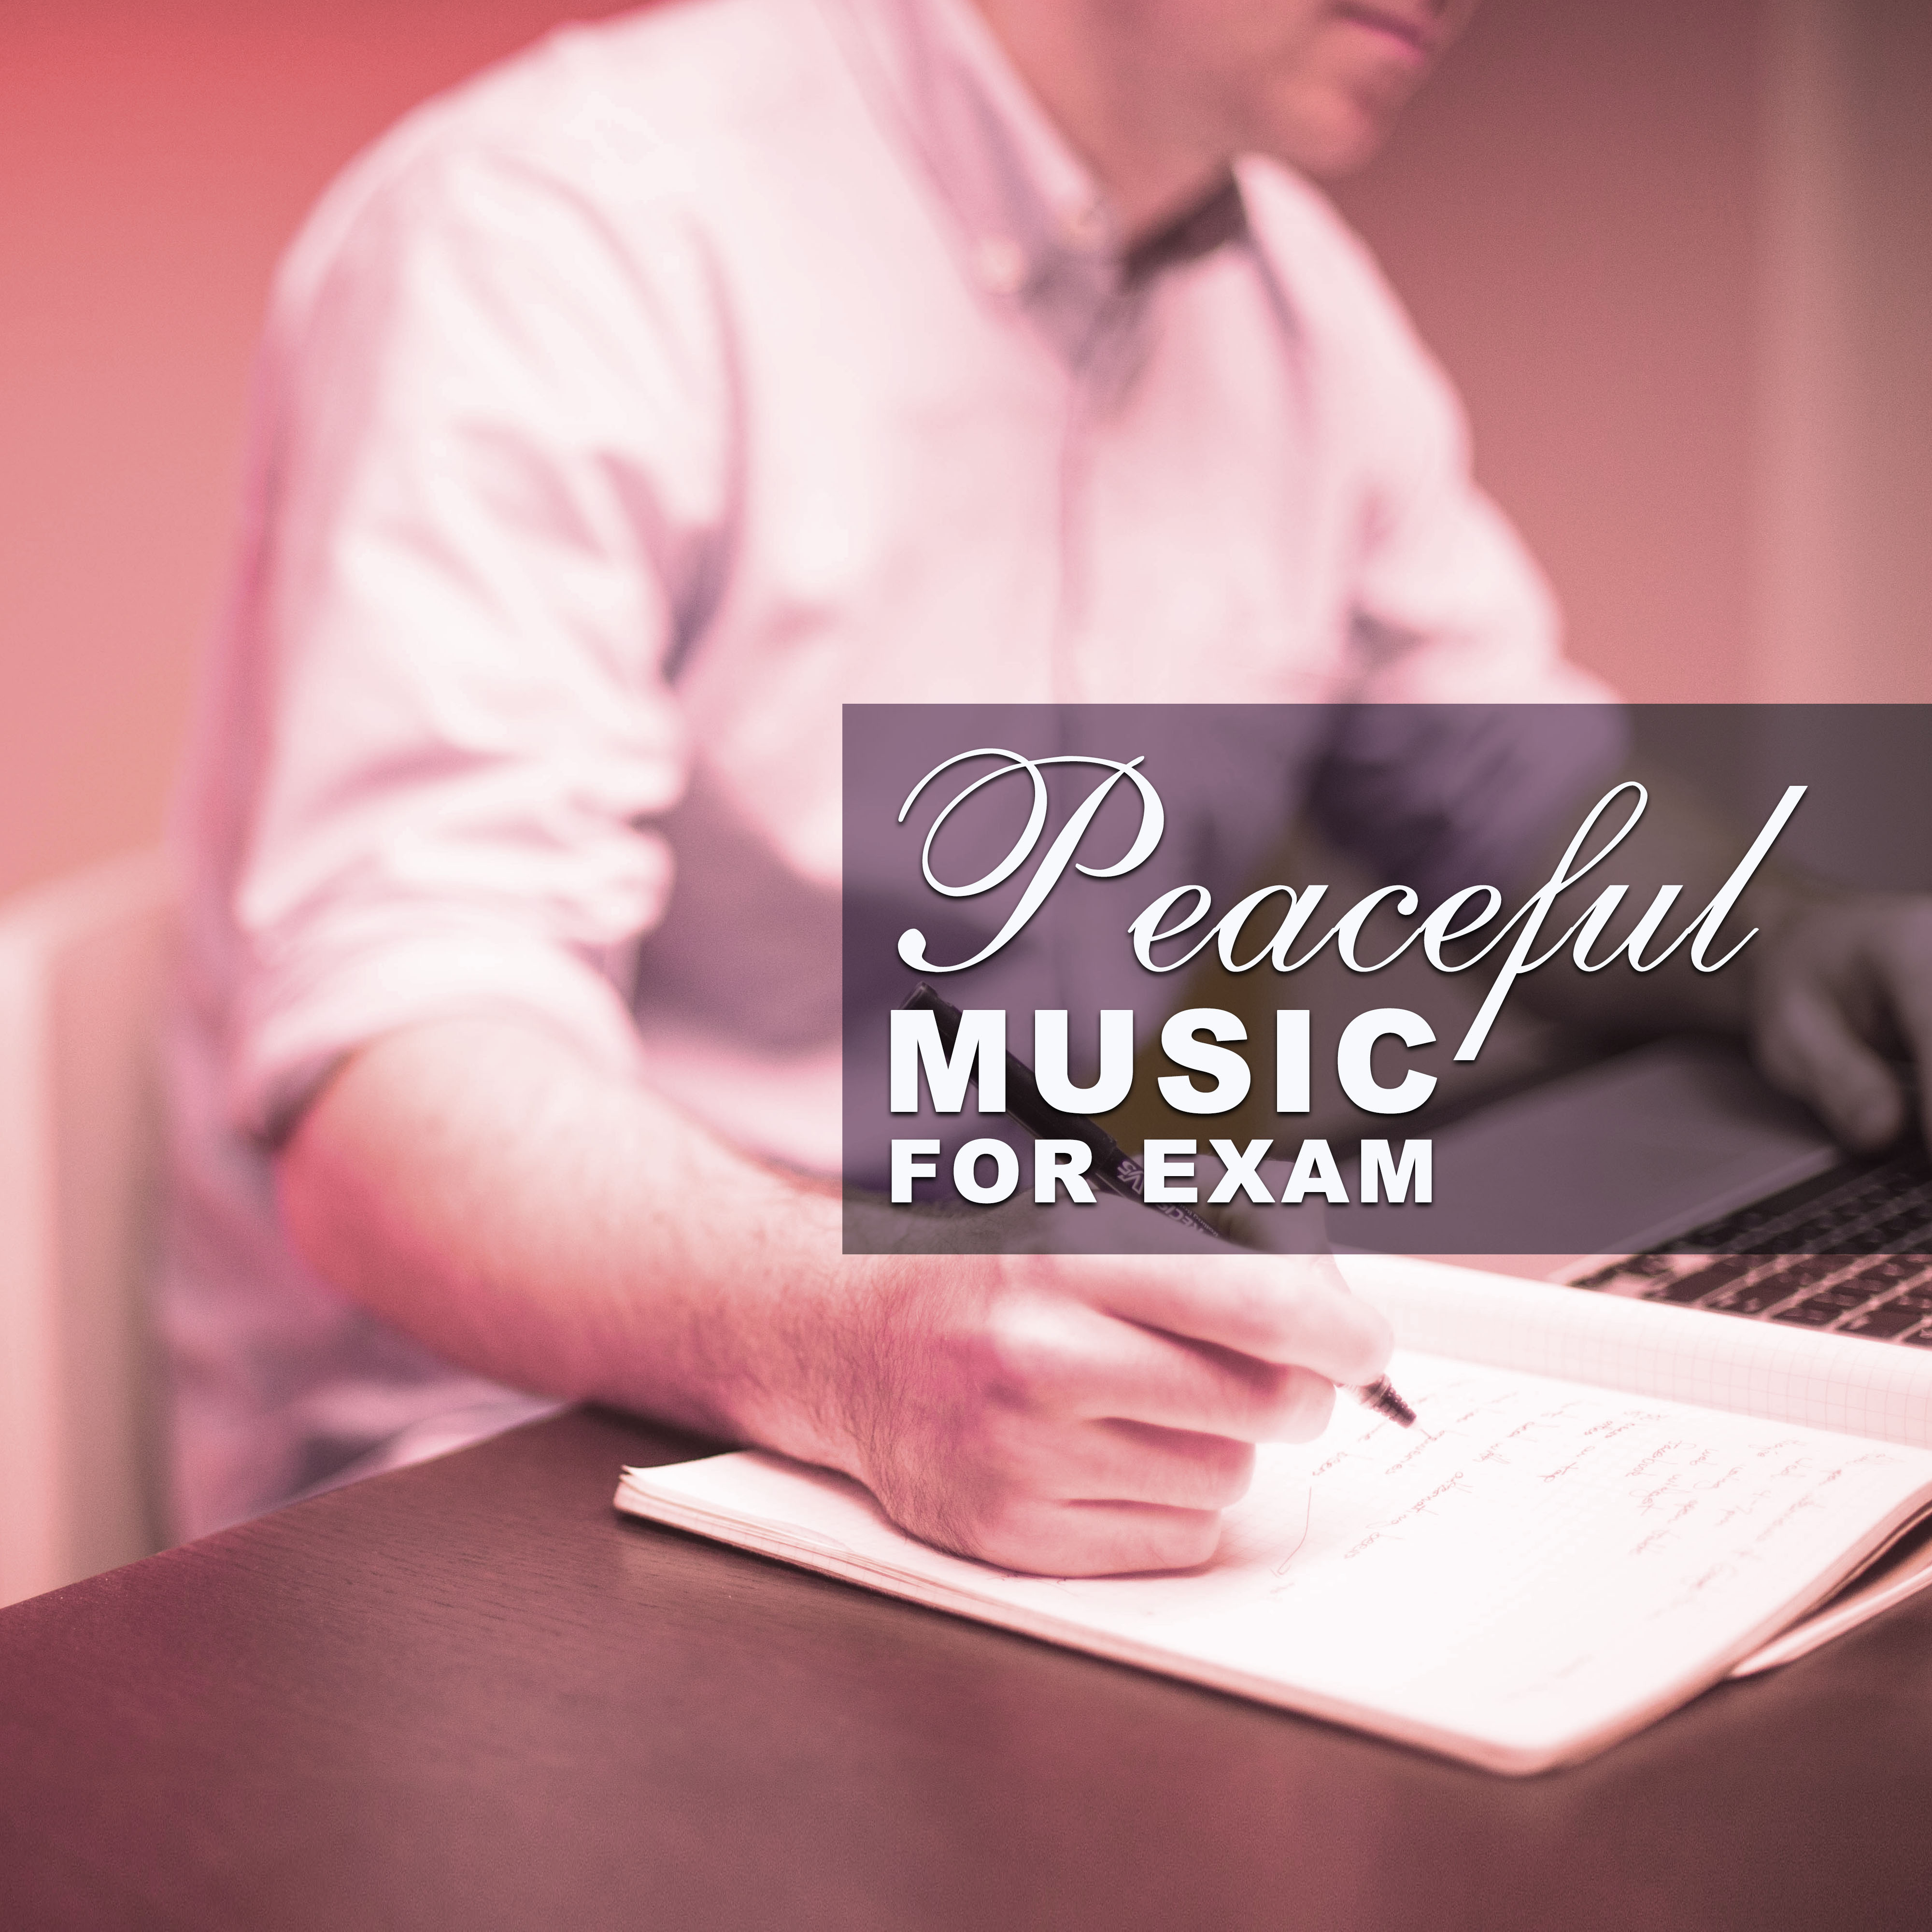 Peaceful Music for Exam – Music Teaching, Classical Music for Study, Concentration Songs, Mozart, Bach